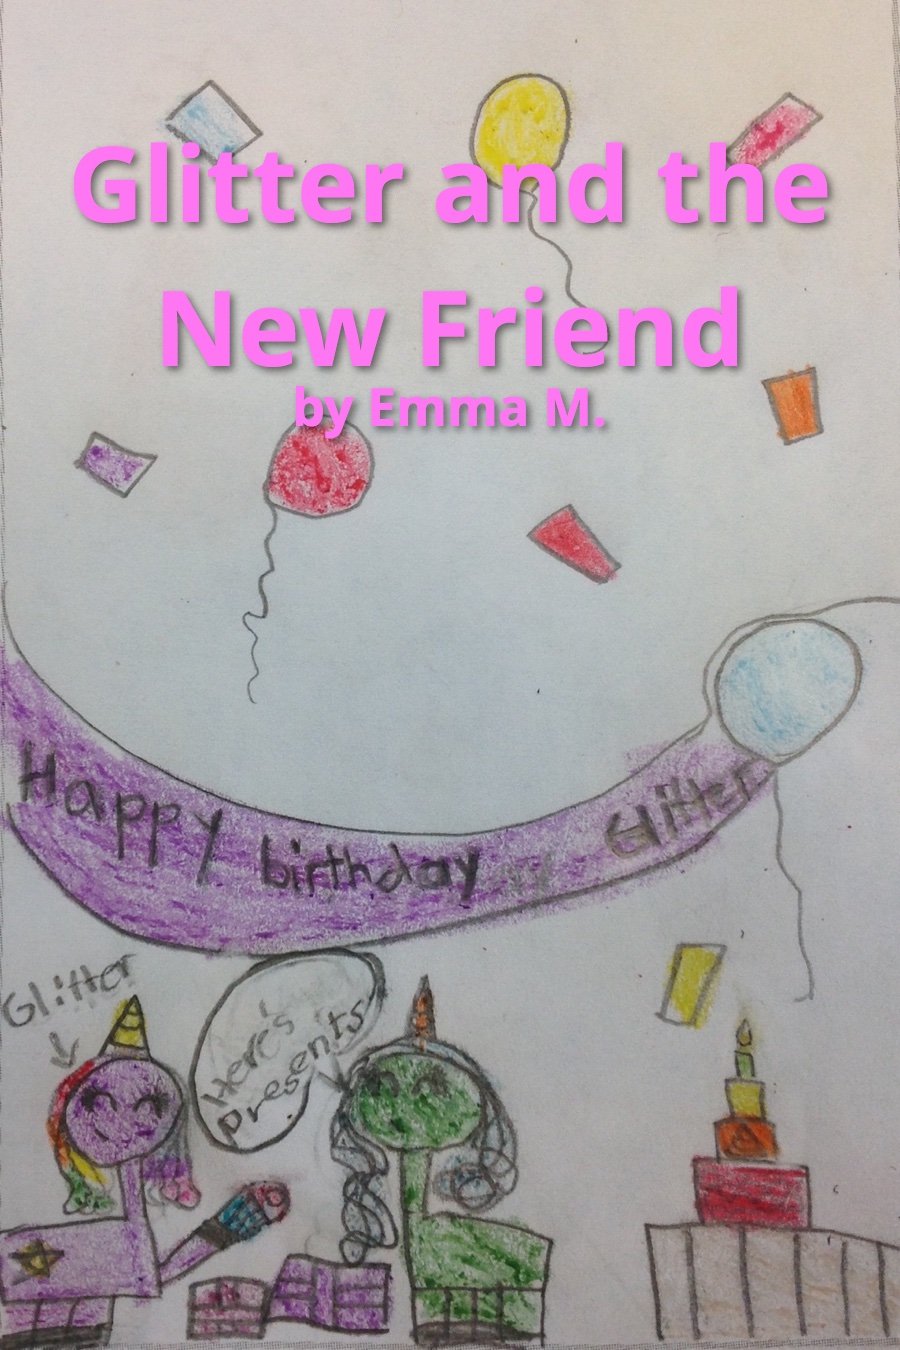 Glitter and the New Friend by Emma M